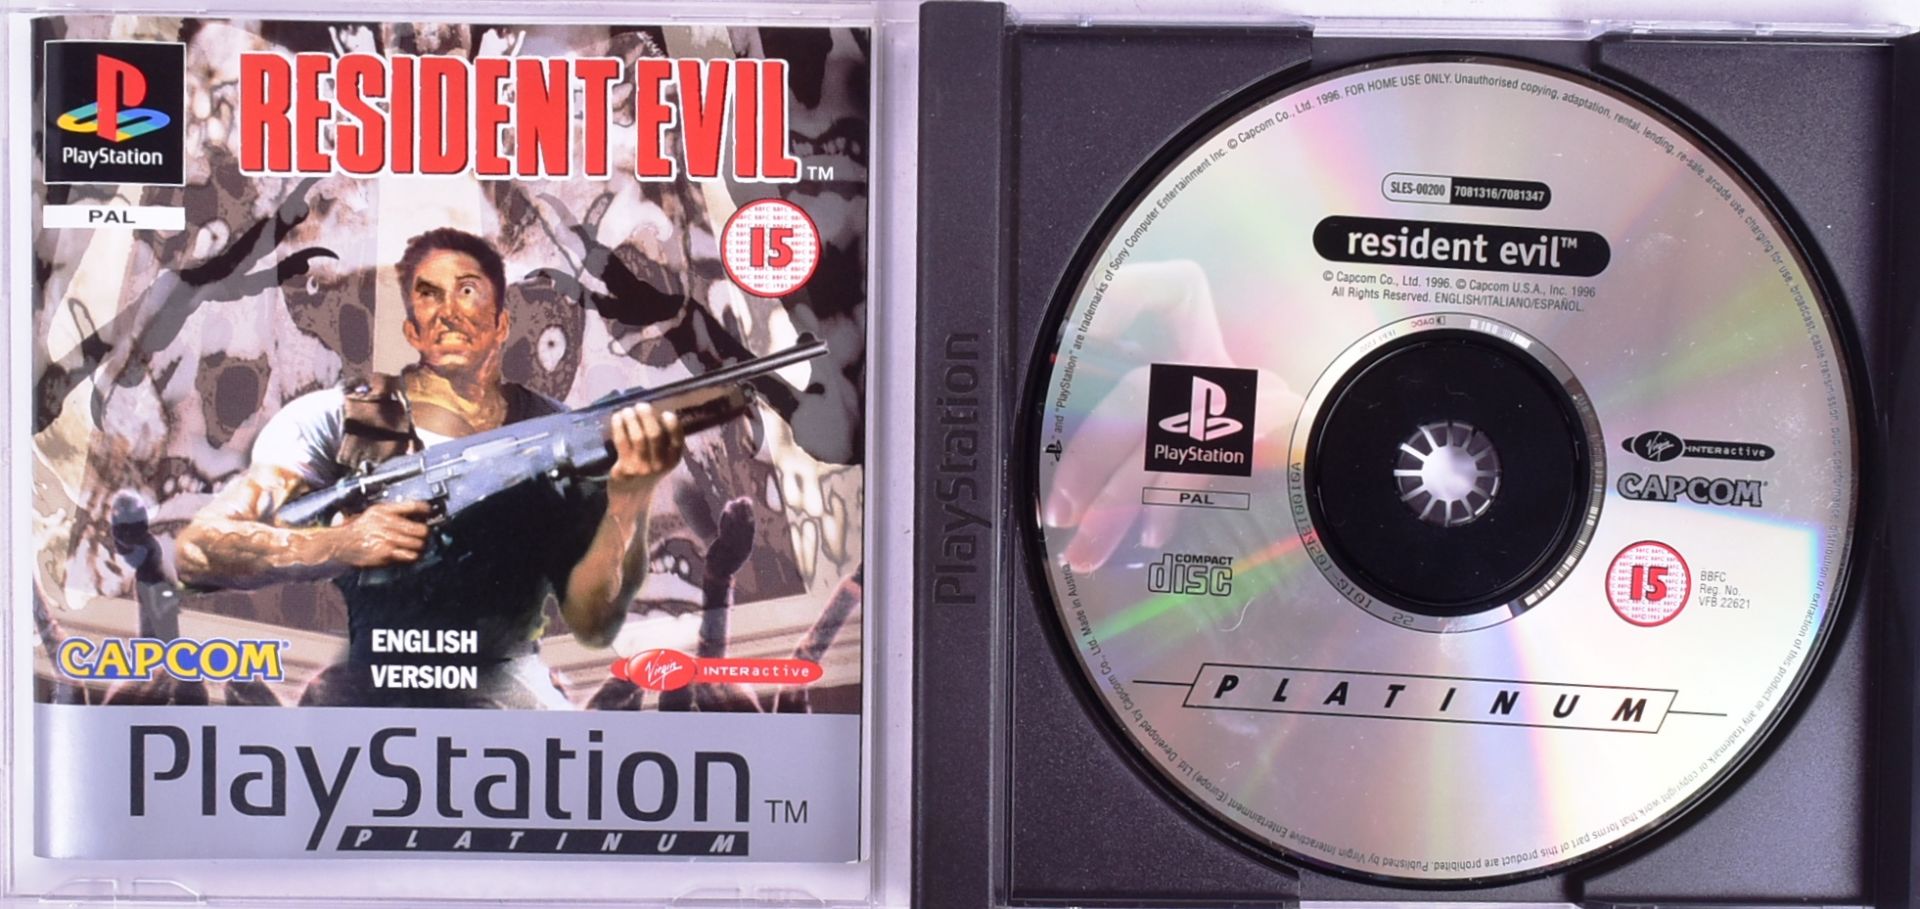 RETRO GAMING - PLAYSTATION ONE - RESIDENT EVIL 1 2 & 3 - Image 3 of 4